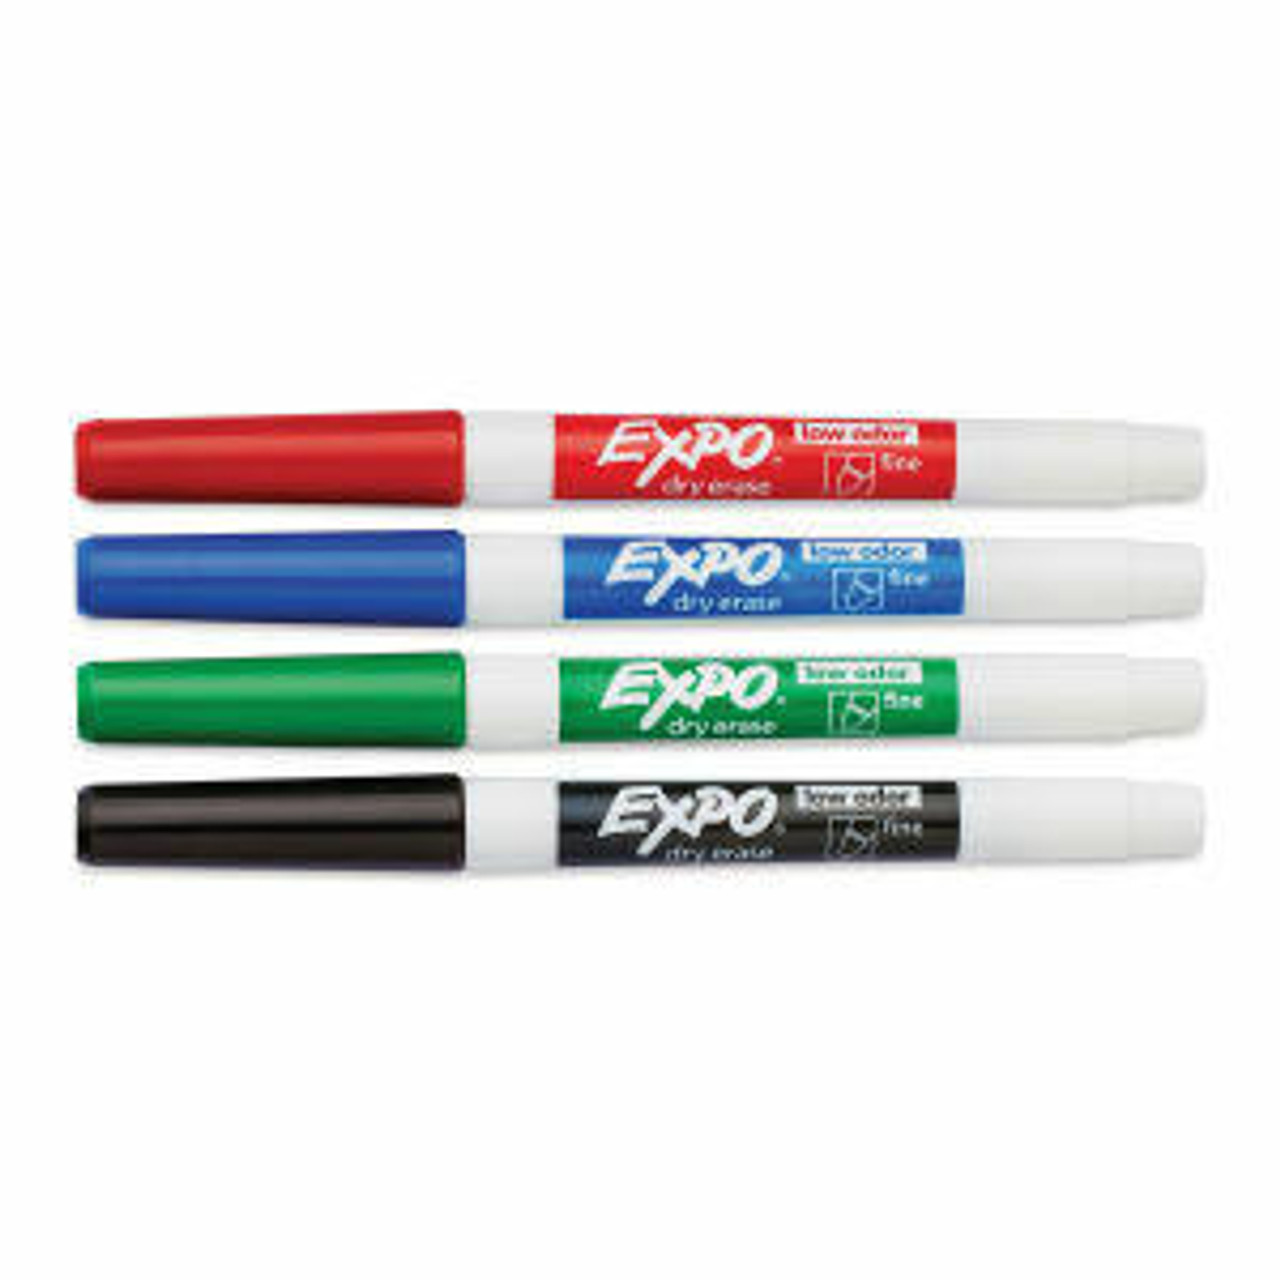 https://cdn11.bigcommerce.com/s-9uf88xhege/images/stencil/1280x1280/products/9096/42137/sanford-expo-low-odor-dry-erase-marker-set-fine-tip-primary-colors__24627.1689964707.jpg?c=1?imbypass=on